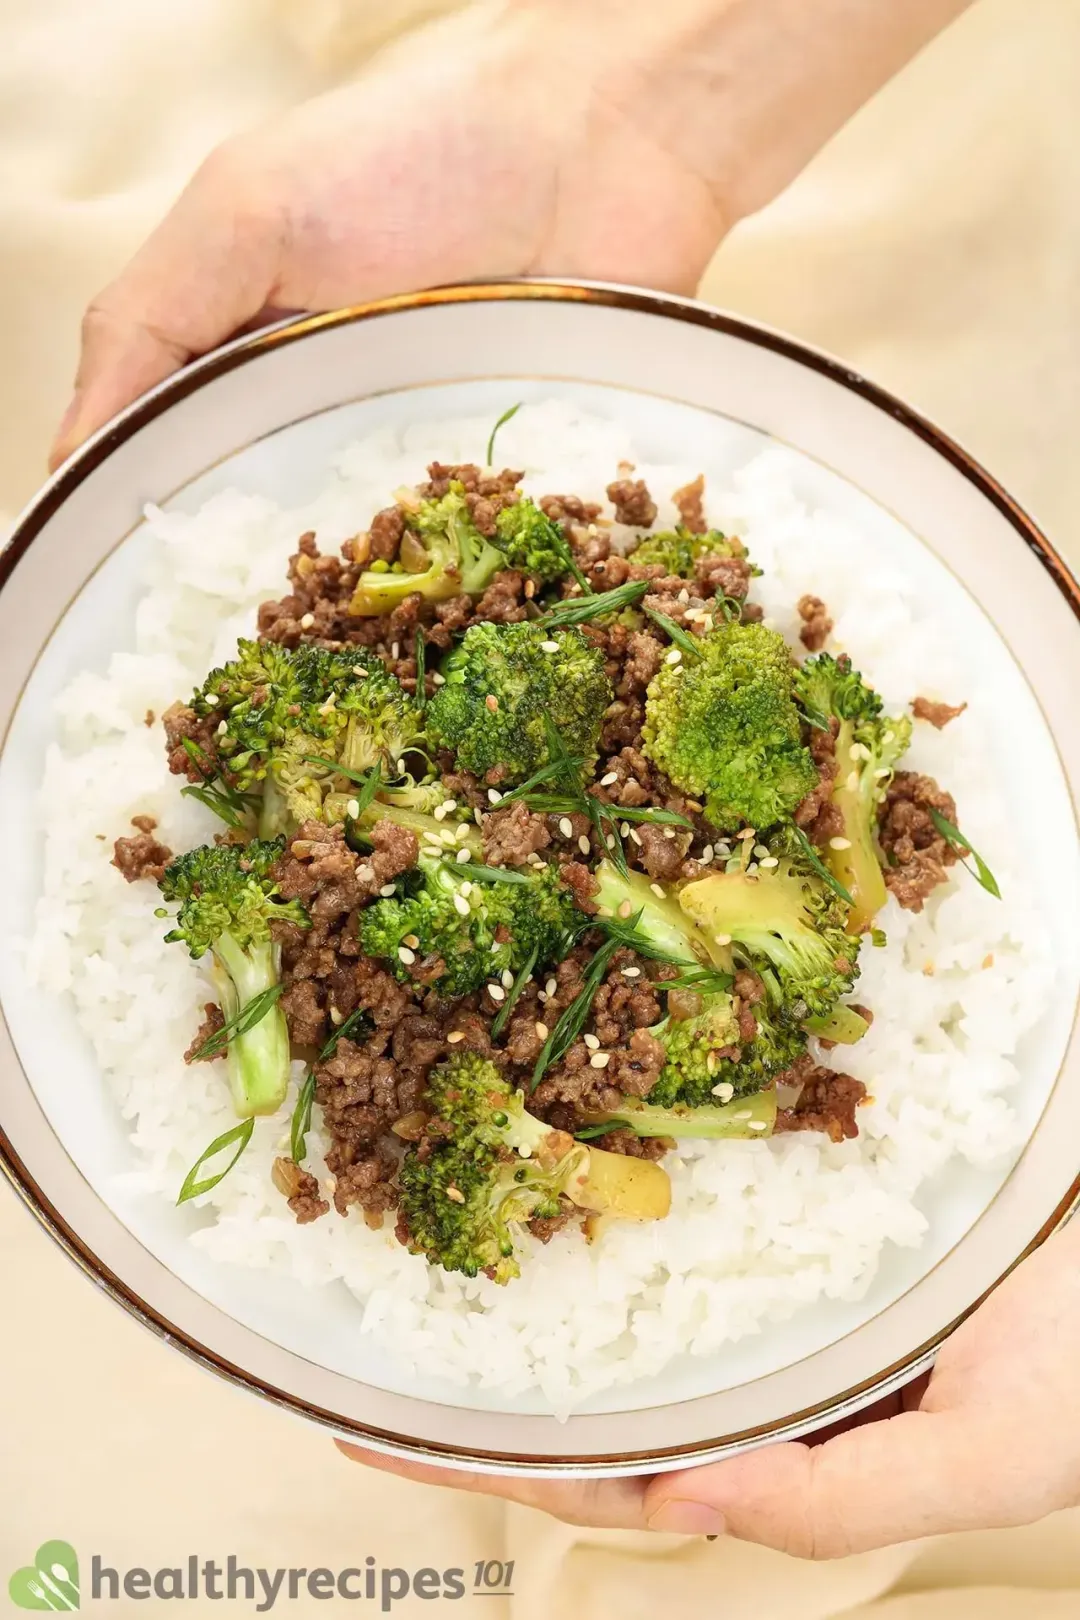 Is Ground Beef and Broccoli Healthy